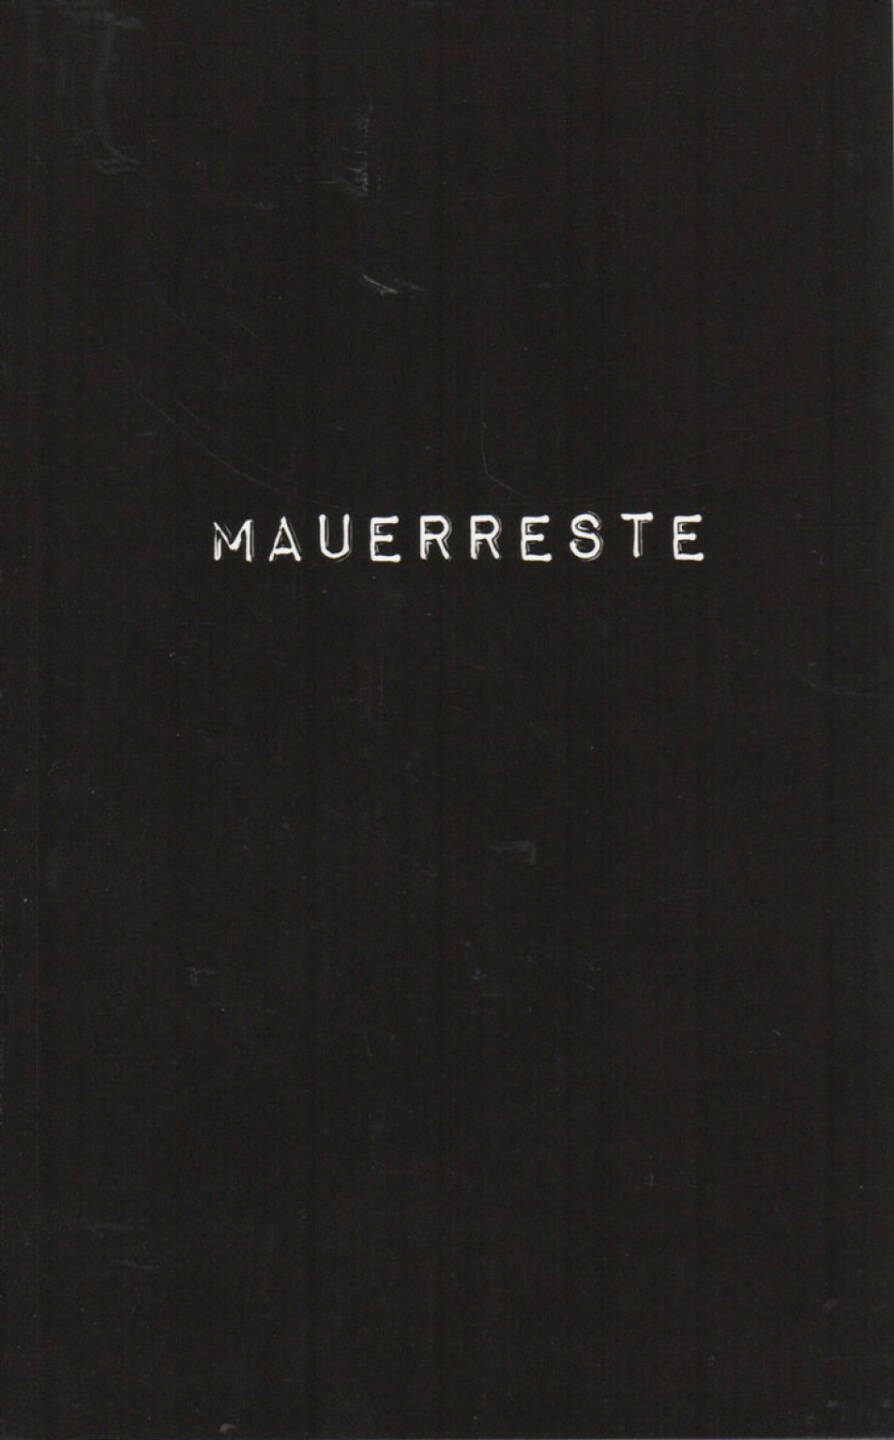 Pascal Anders - Mauerreste, Self published 2010, Cover - http://josefchladek.com/book/pascal_anders_-_mauerreste